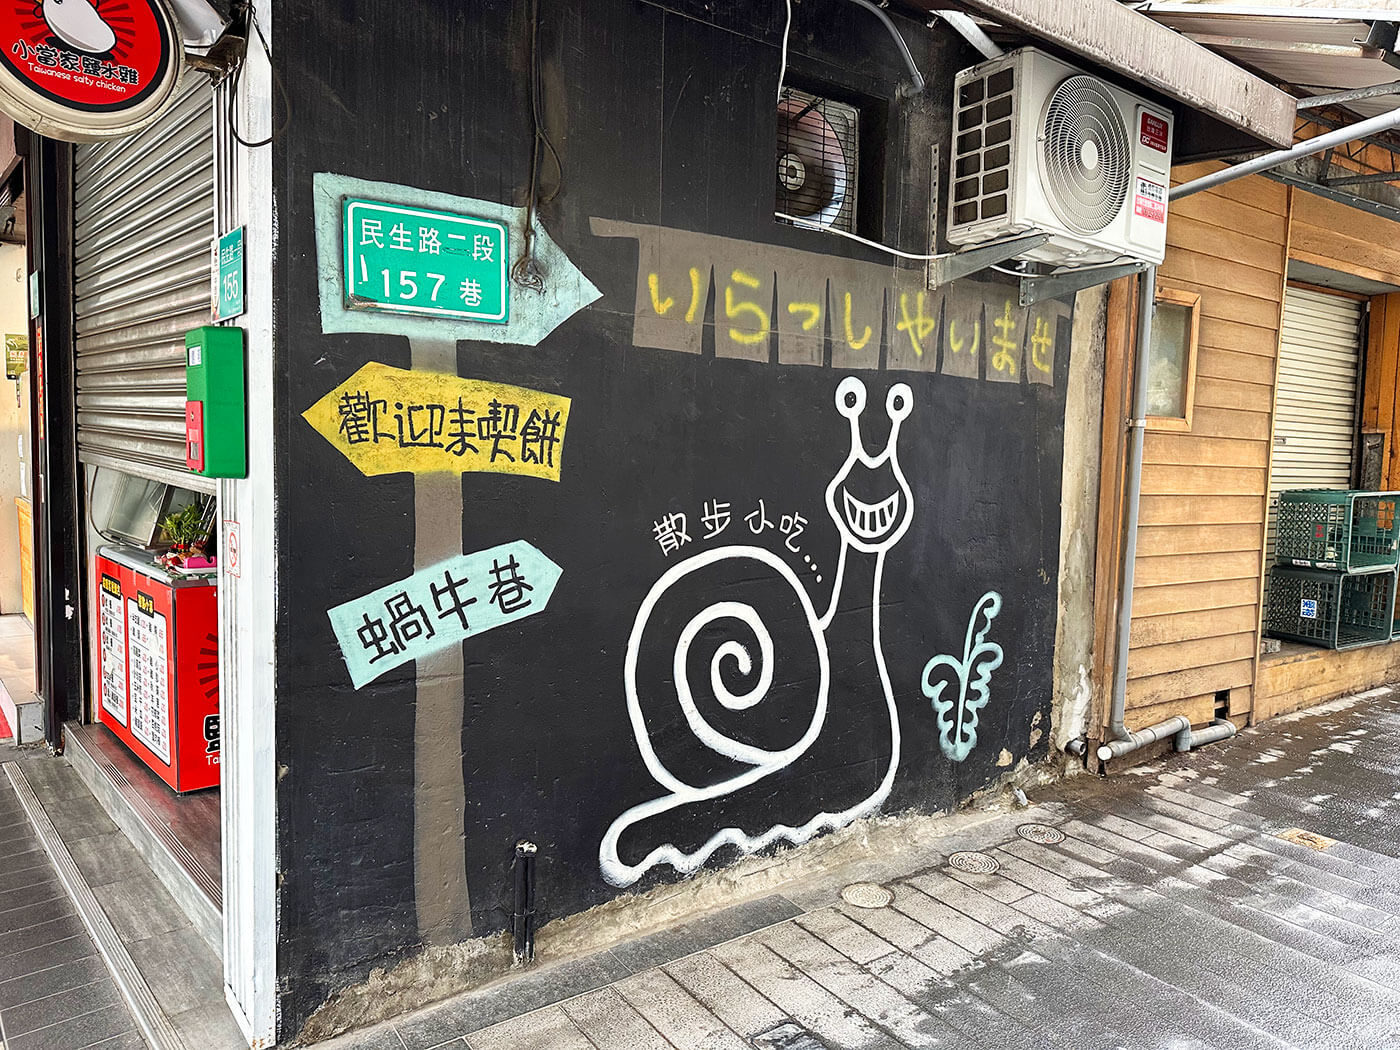 Snail Alley in Tainan